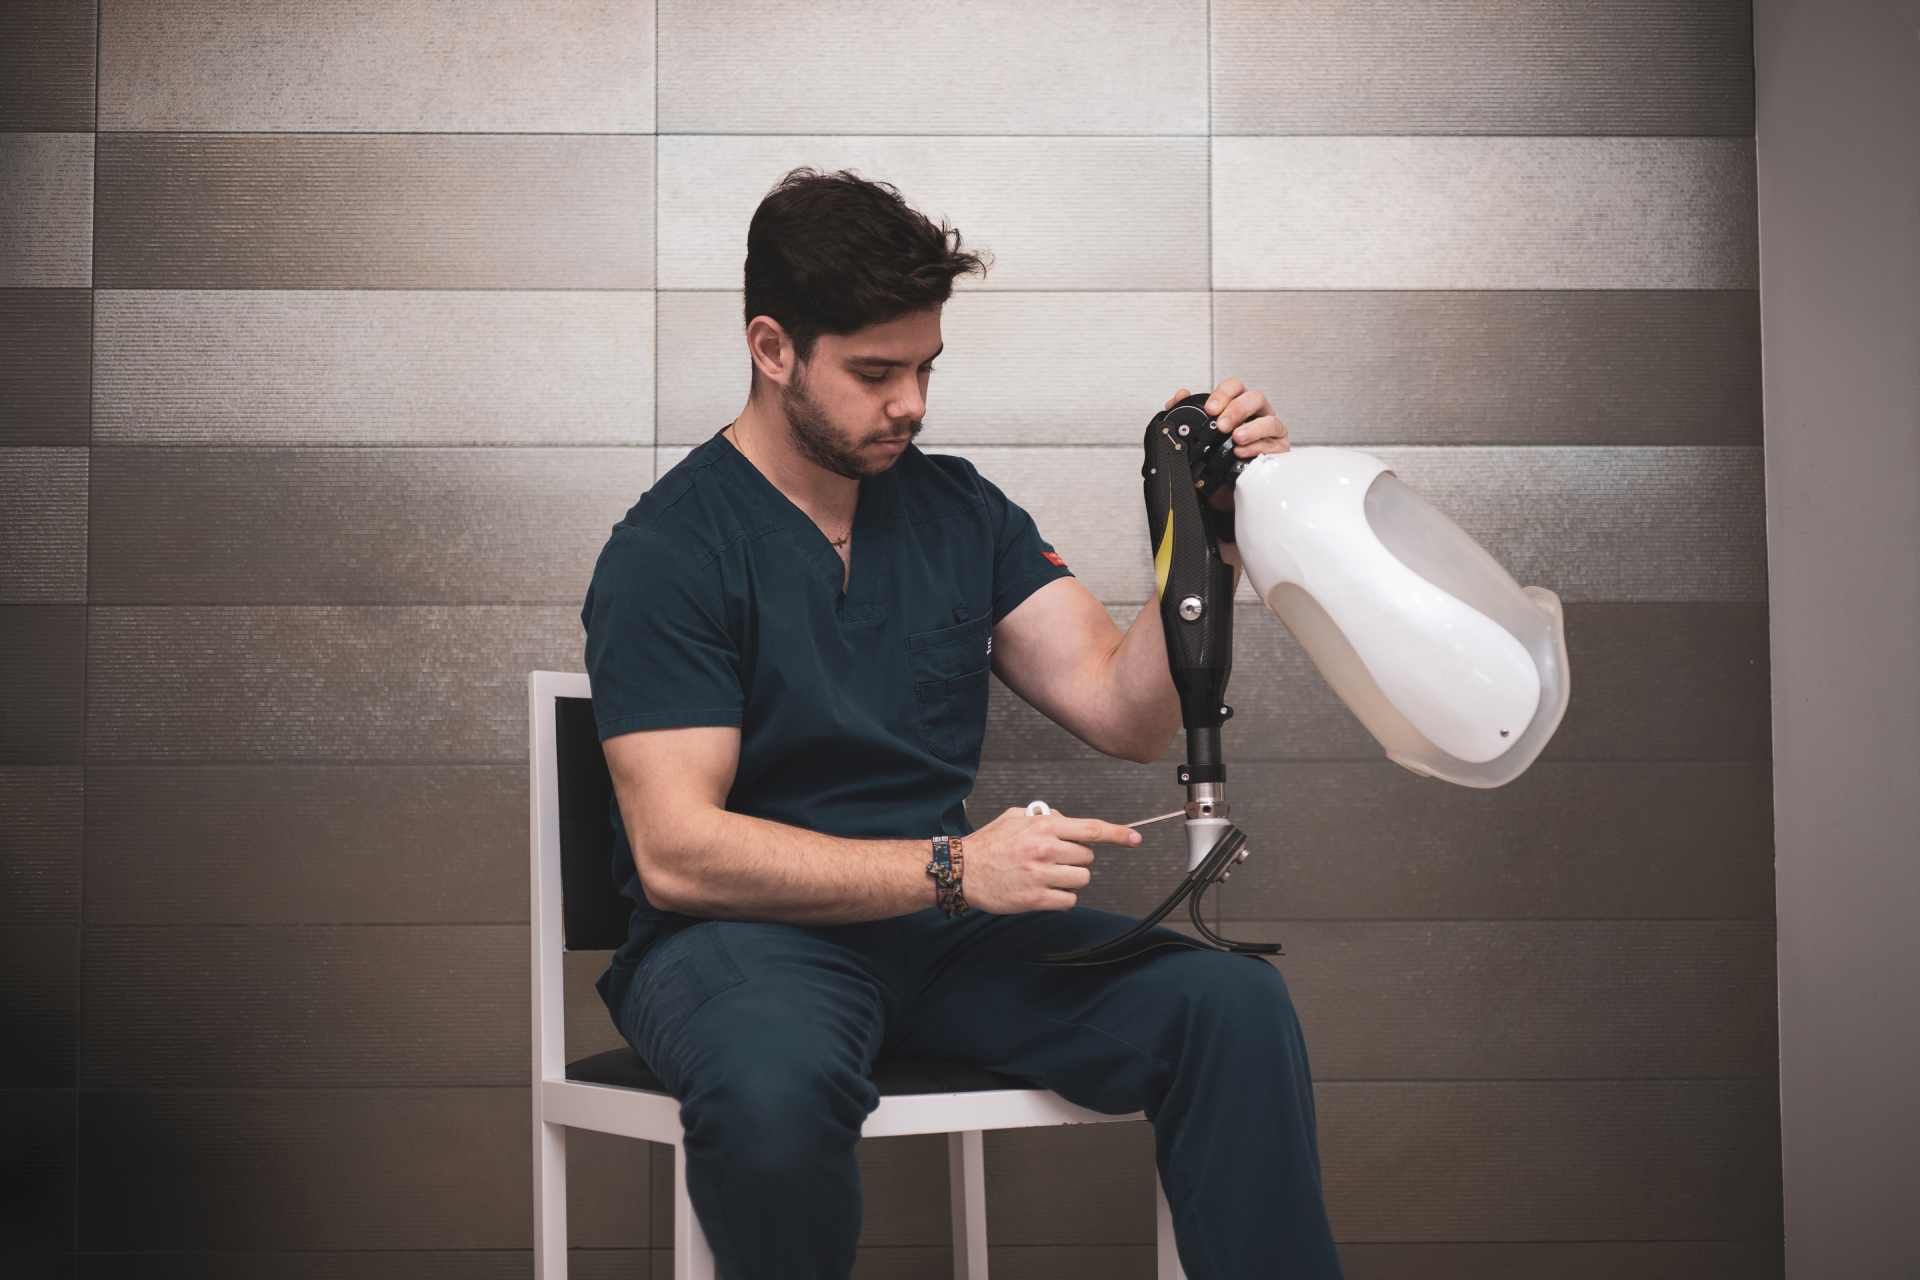 A person receiving care for a prosthetic device at Kenney Orthopedics near Lexington, Kentucky (KY)